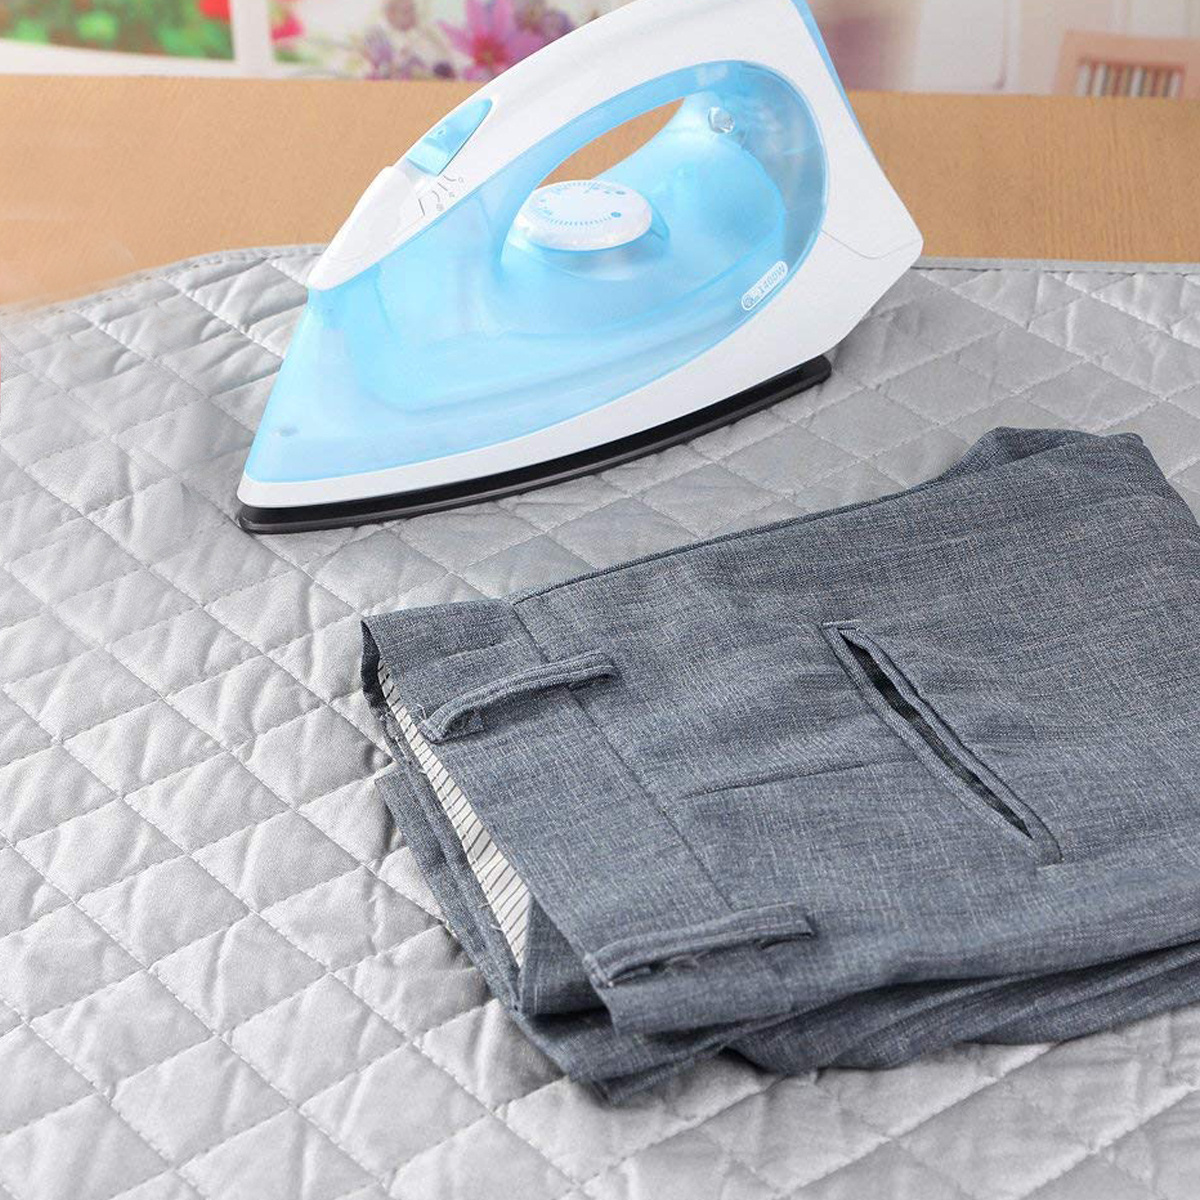 Ironing Mat Dryer Top Protector Portable Foldable Heat Resistant